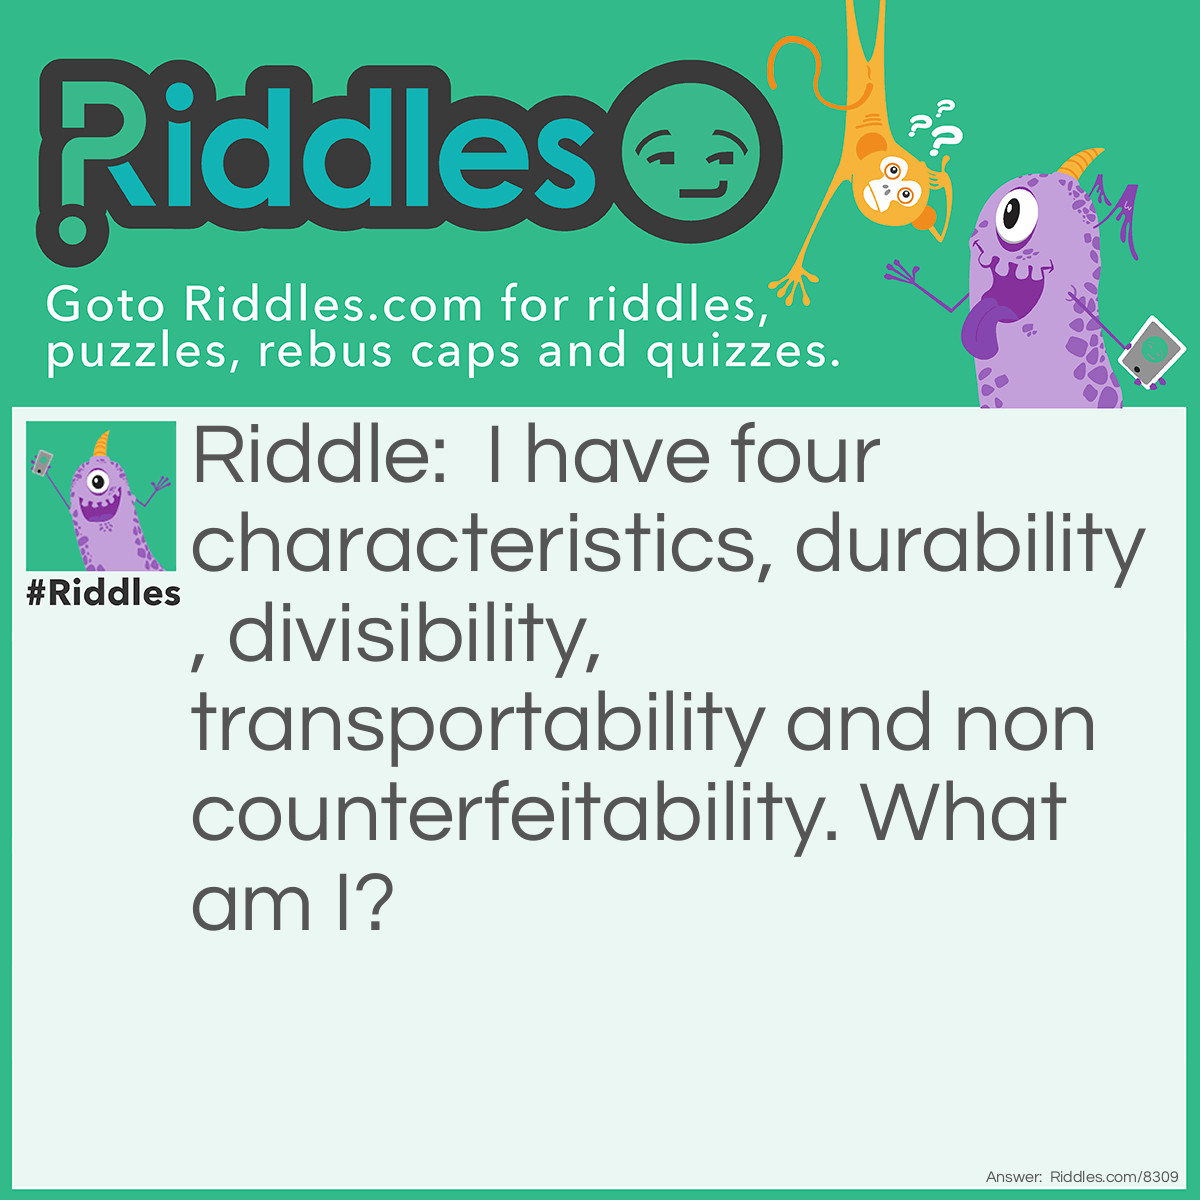 Riddle: I have four characteristics, durability, divisibility, transportability and non counterfeitability. What am I? Answer: Money.